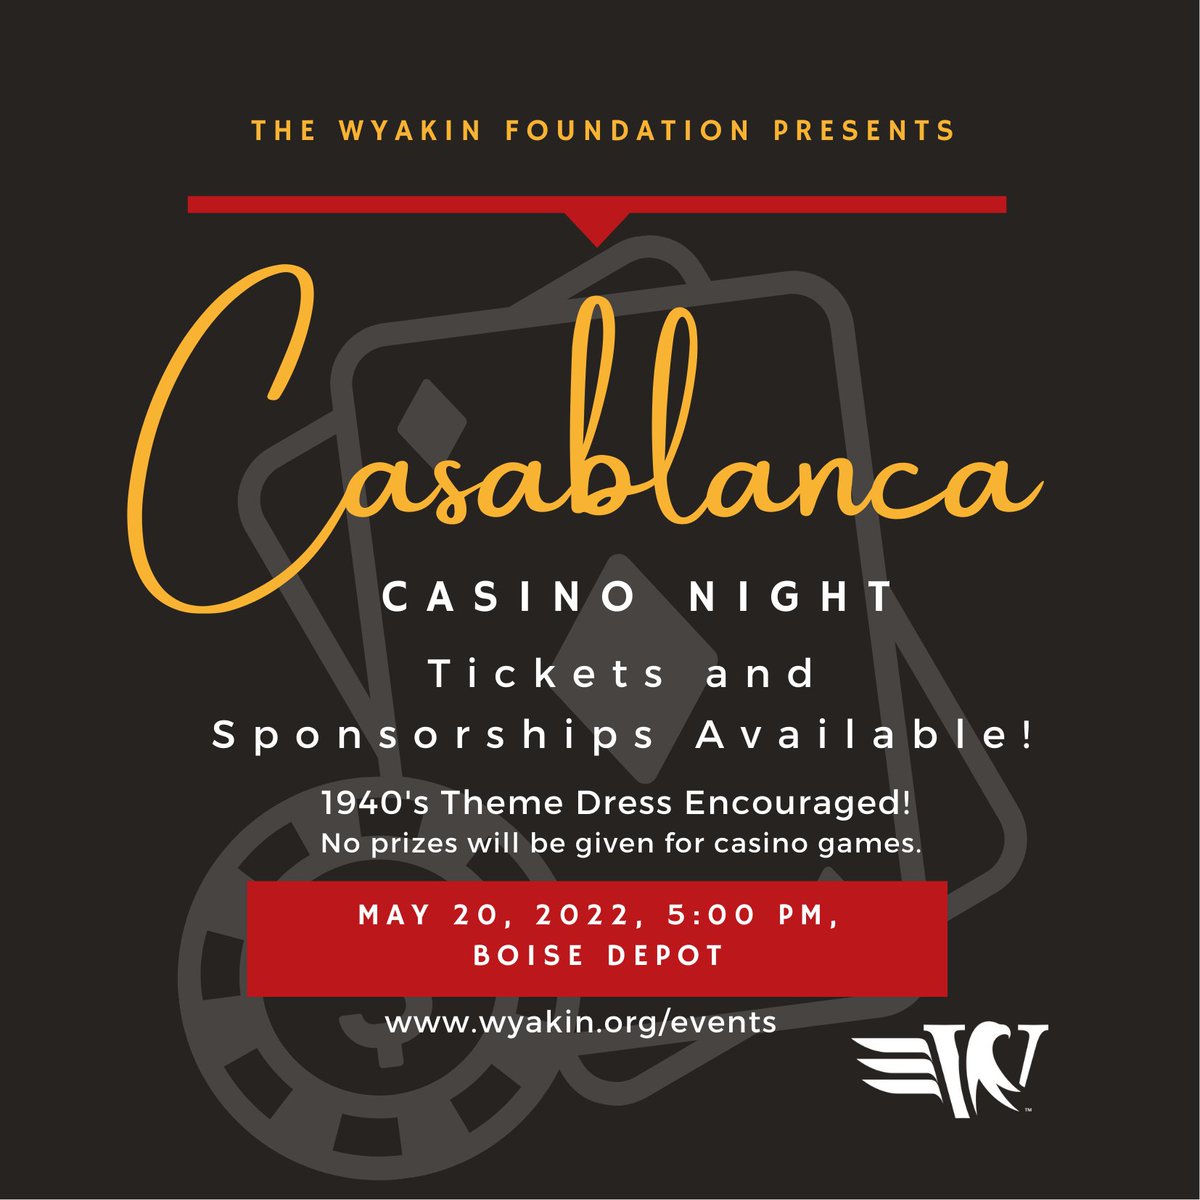 There is still time to get your ticket to this event! Don't miss out. 👉bit.ly/Casinonight2022 #boiseevents #thisisboise #veterans